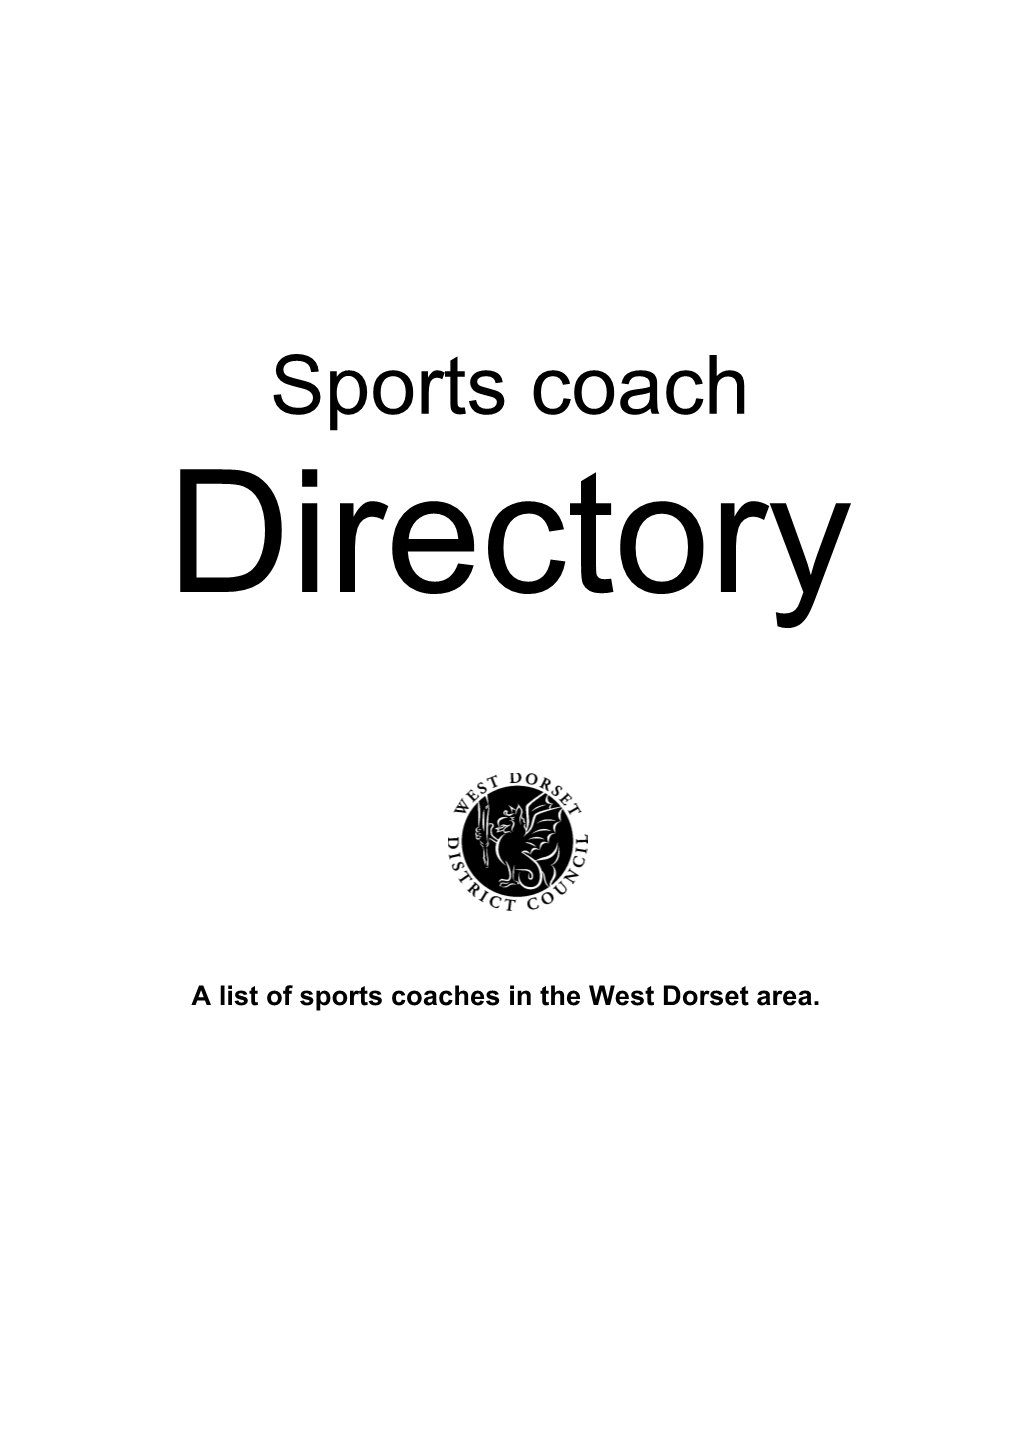 A List of Sports Coaches in the West Dorset Area